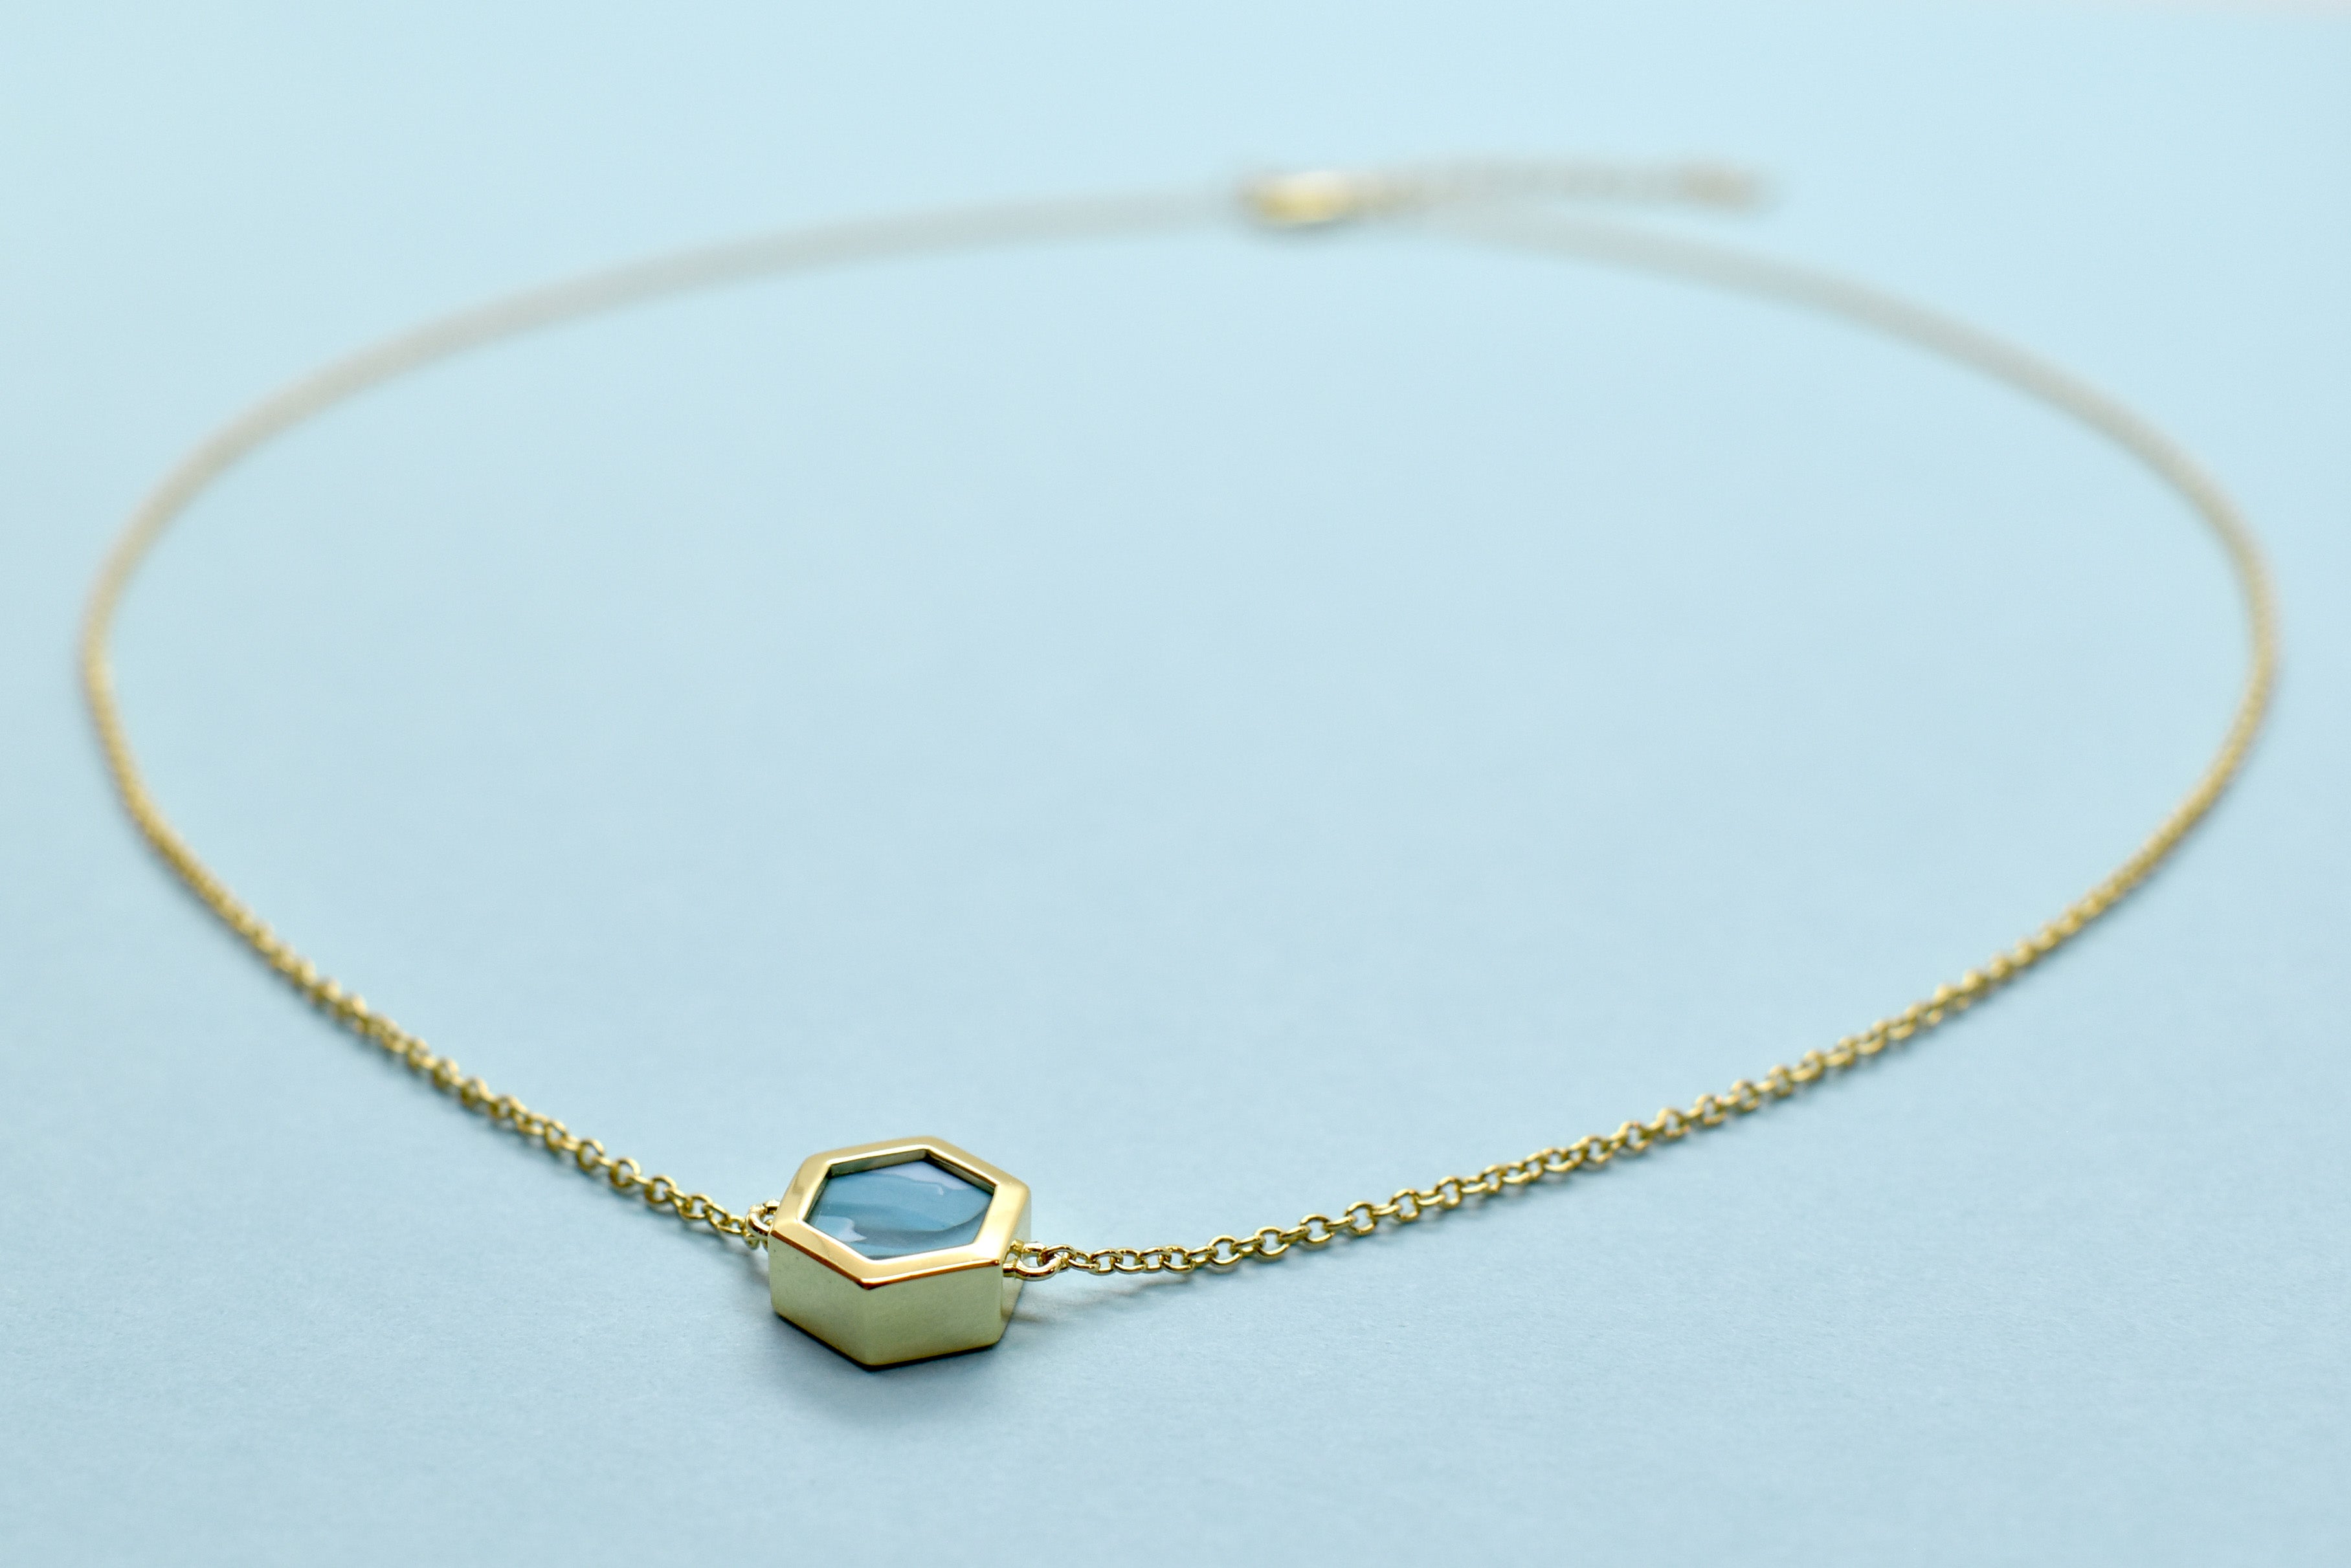 aqua clay necklace polymer geometric necklace hexagon 14k gold dainty gift for bridesmaid